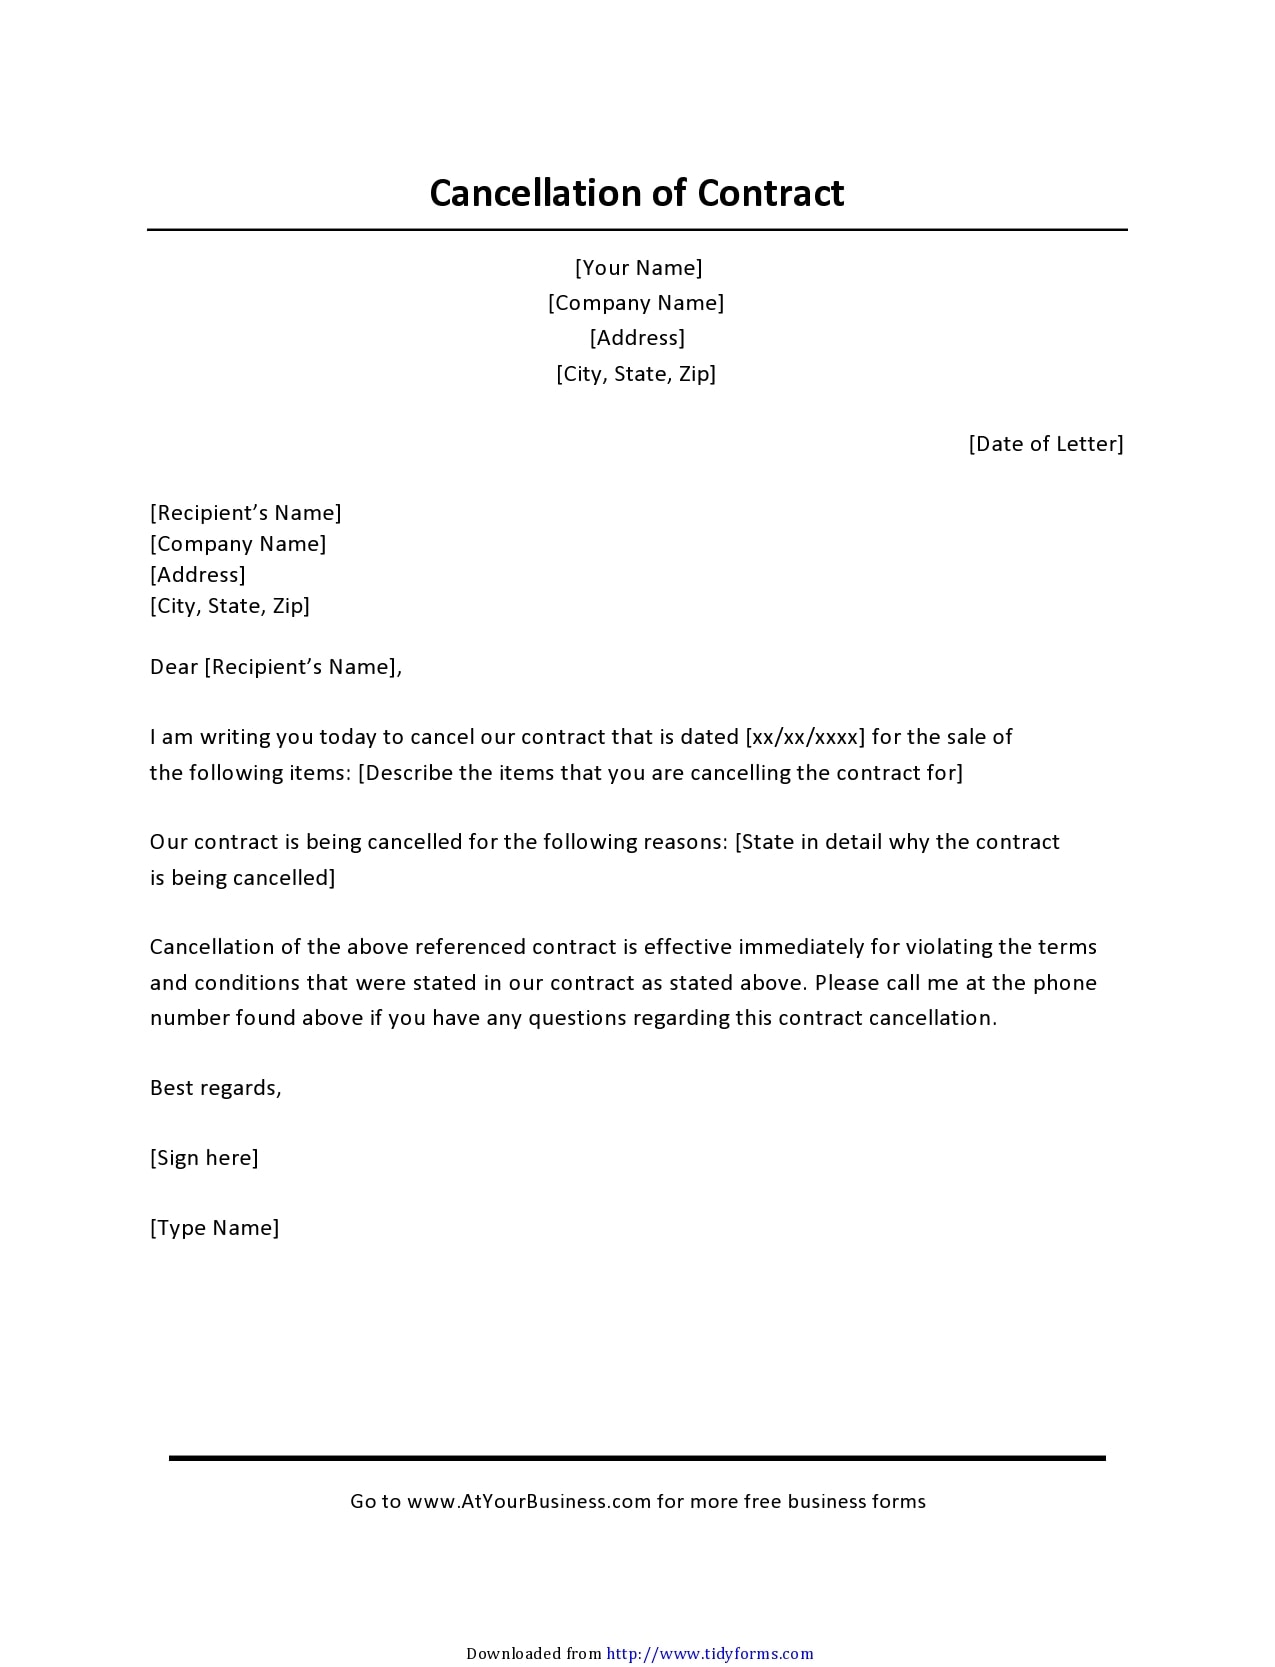 50 Editable Contract Termination Letters (FREE) TemplateArchive